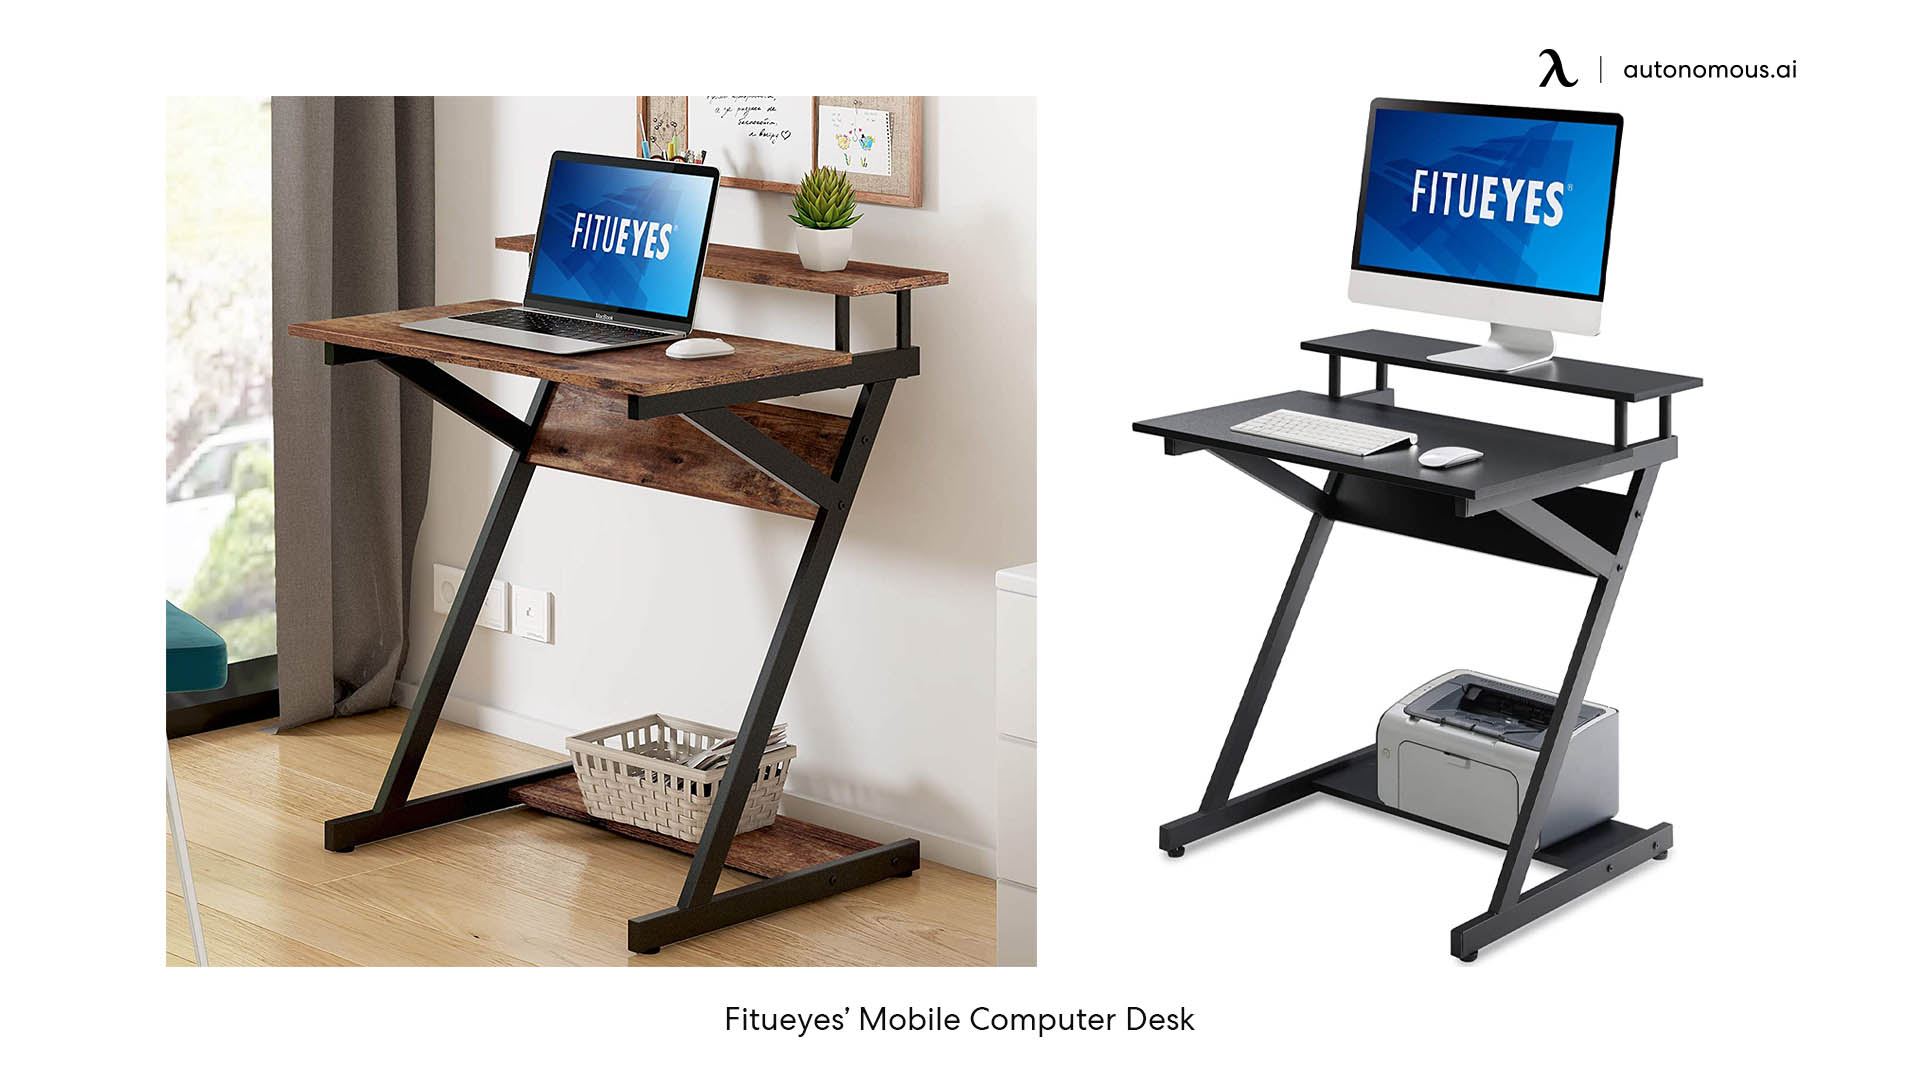 Fitueyes’ Mobile compact computer desk